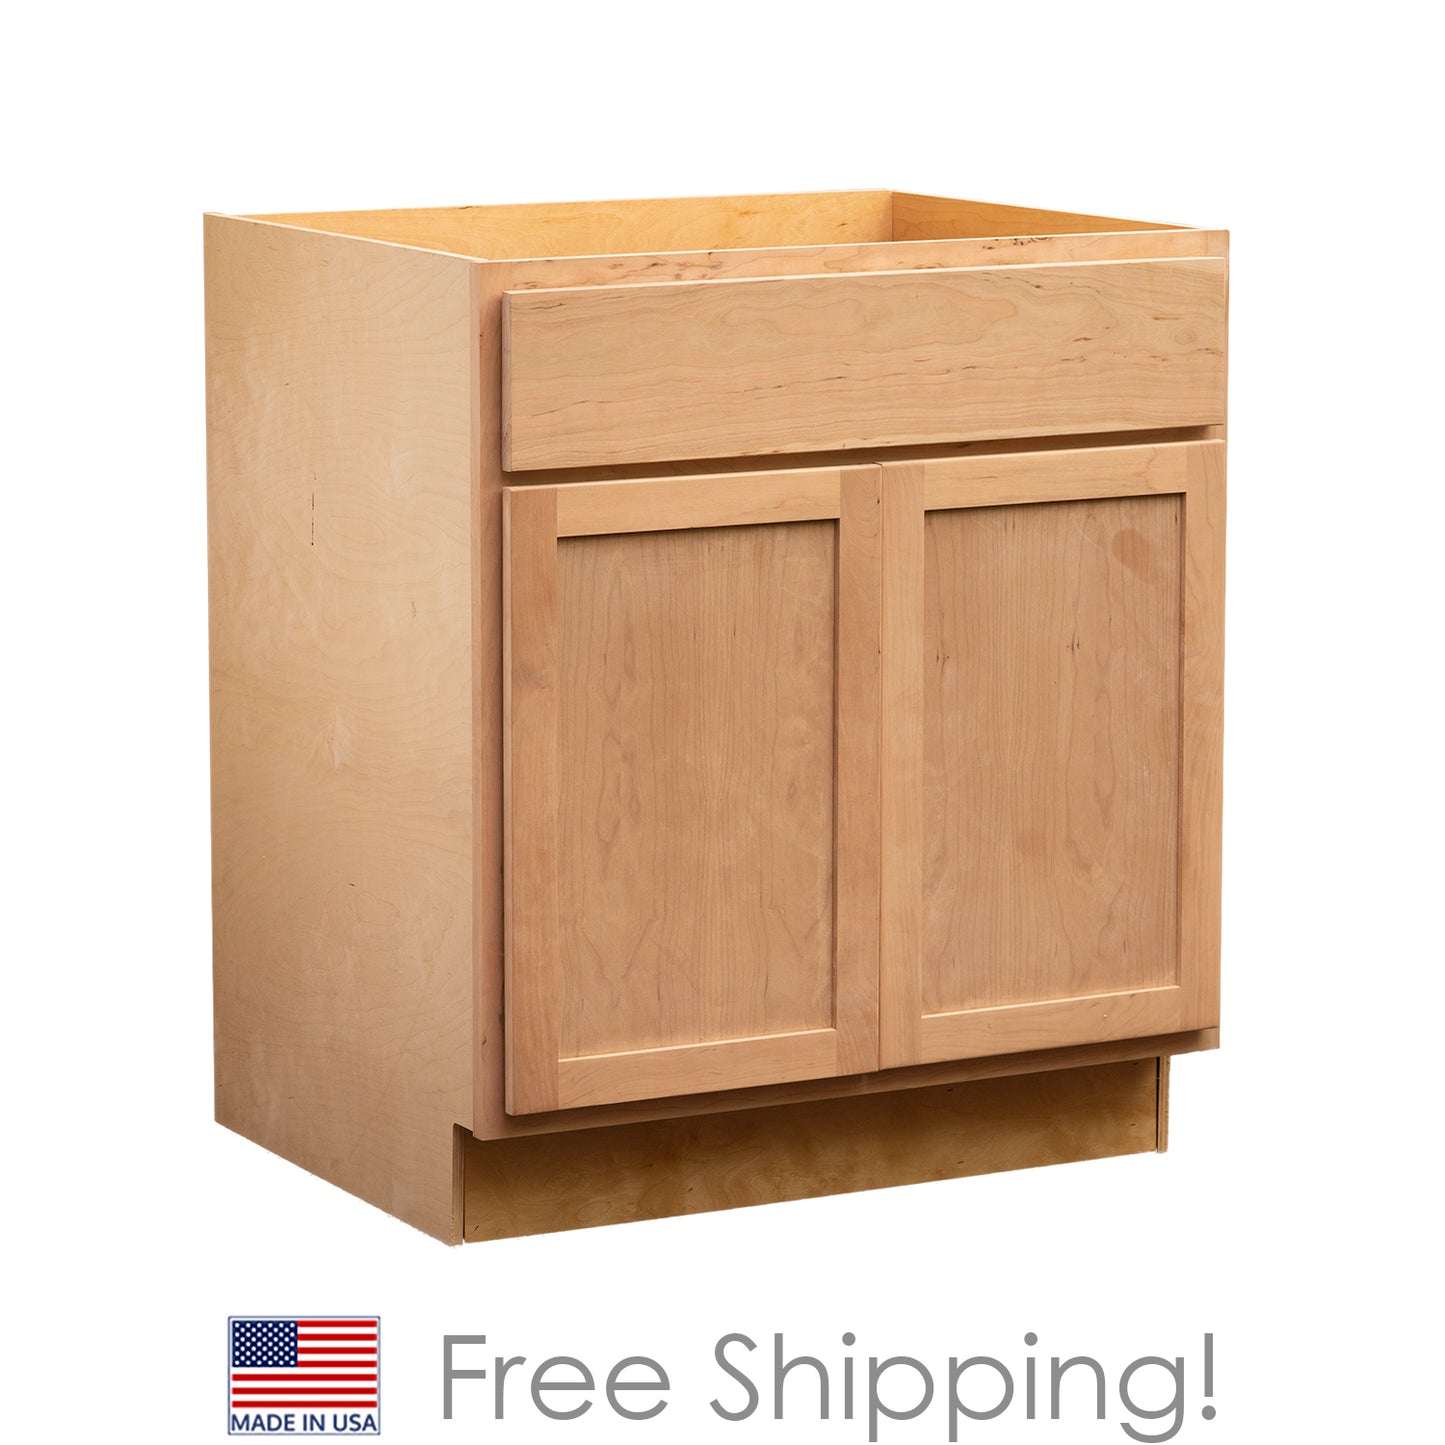 Quicklock RTA (Ready-to-Assemble) Raw Cherry Sink Base Cabinet